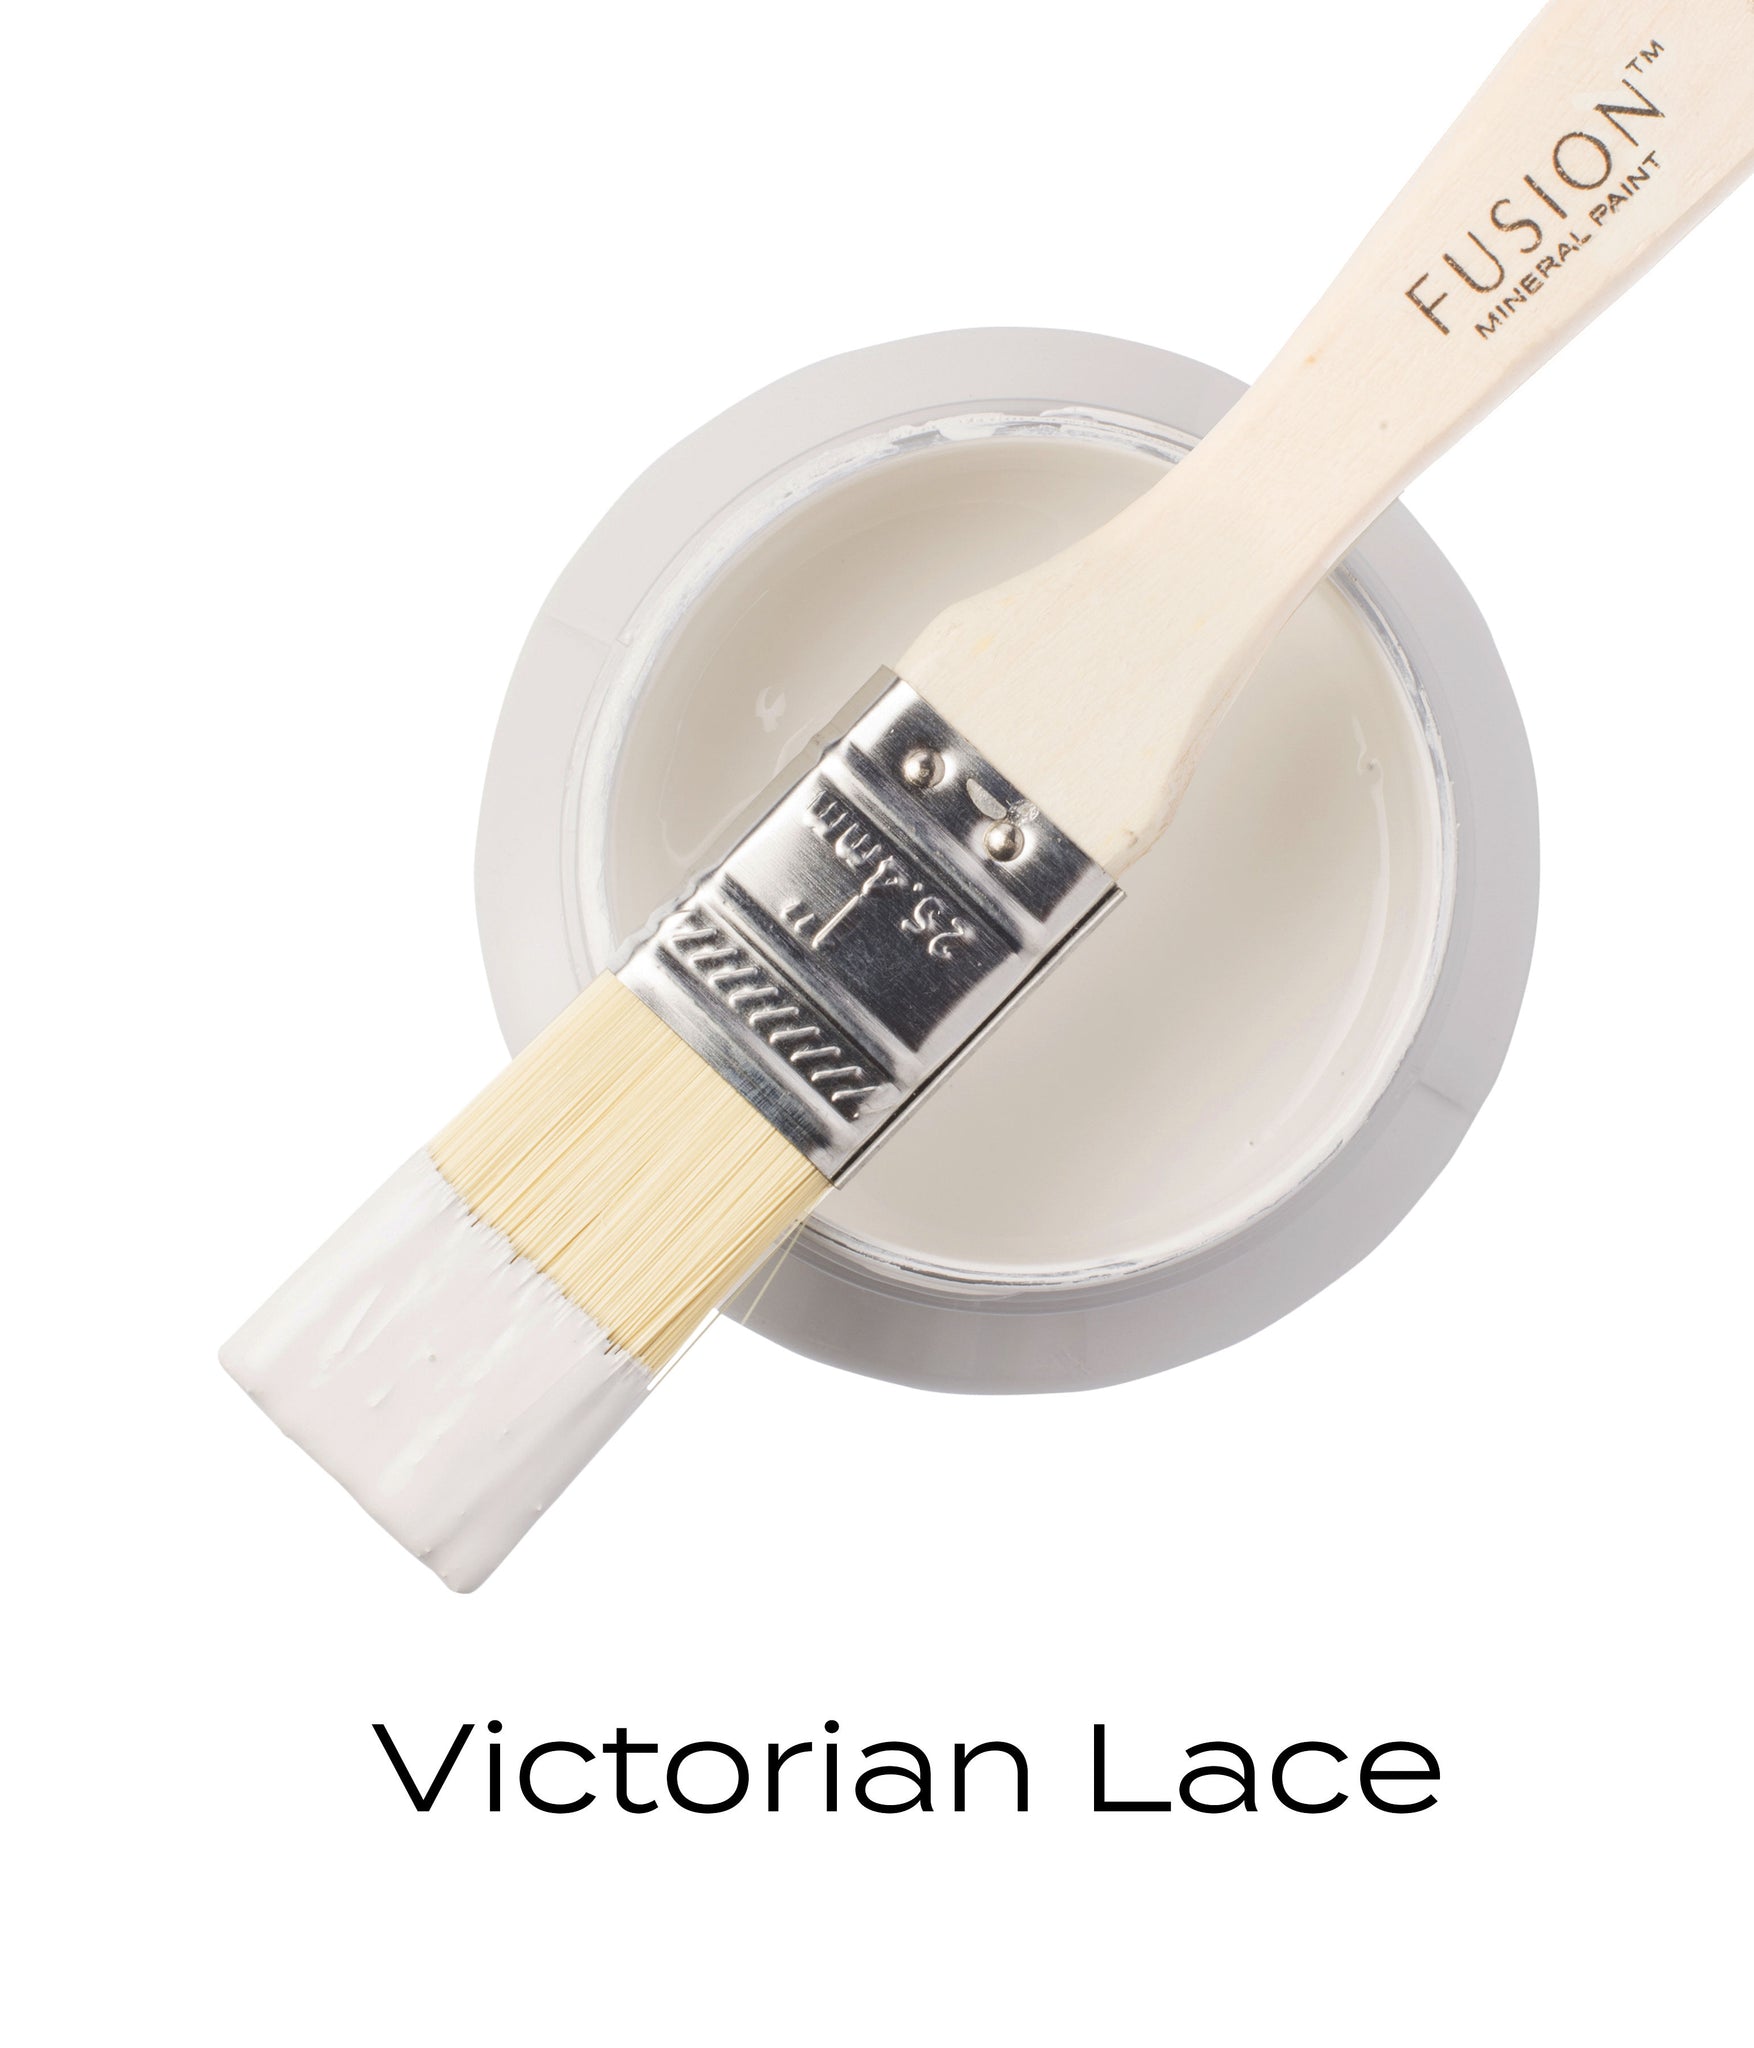 Fusion mineral paint - Victorian Lace